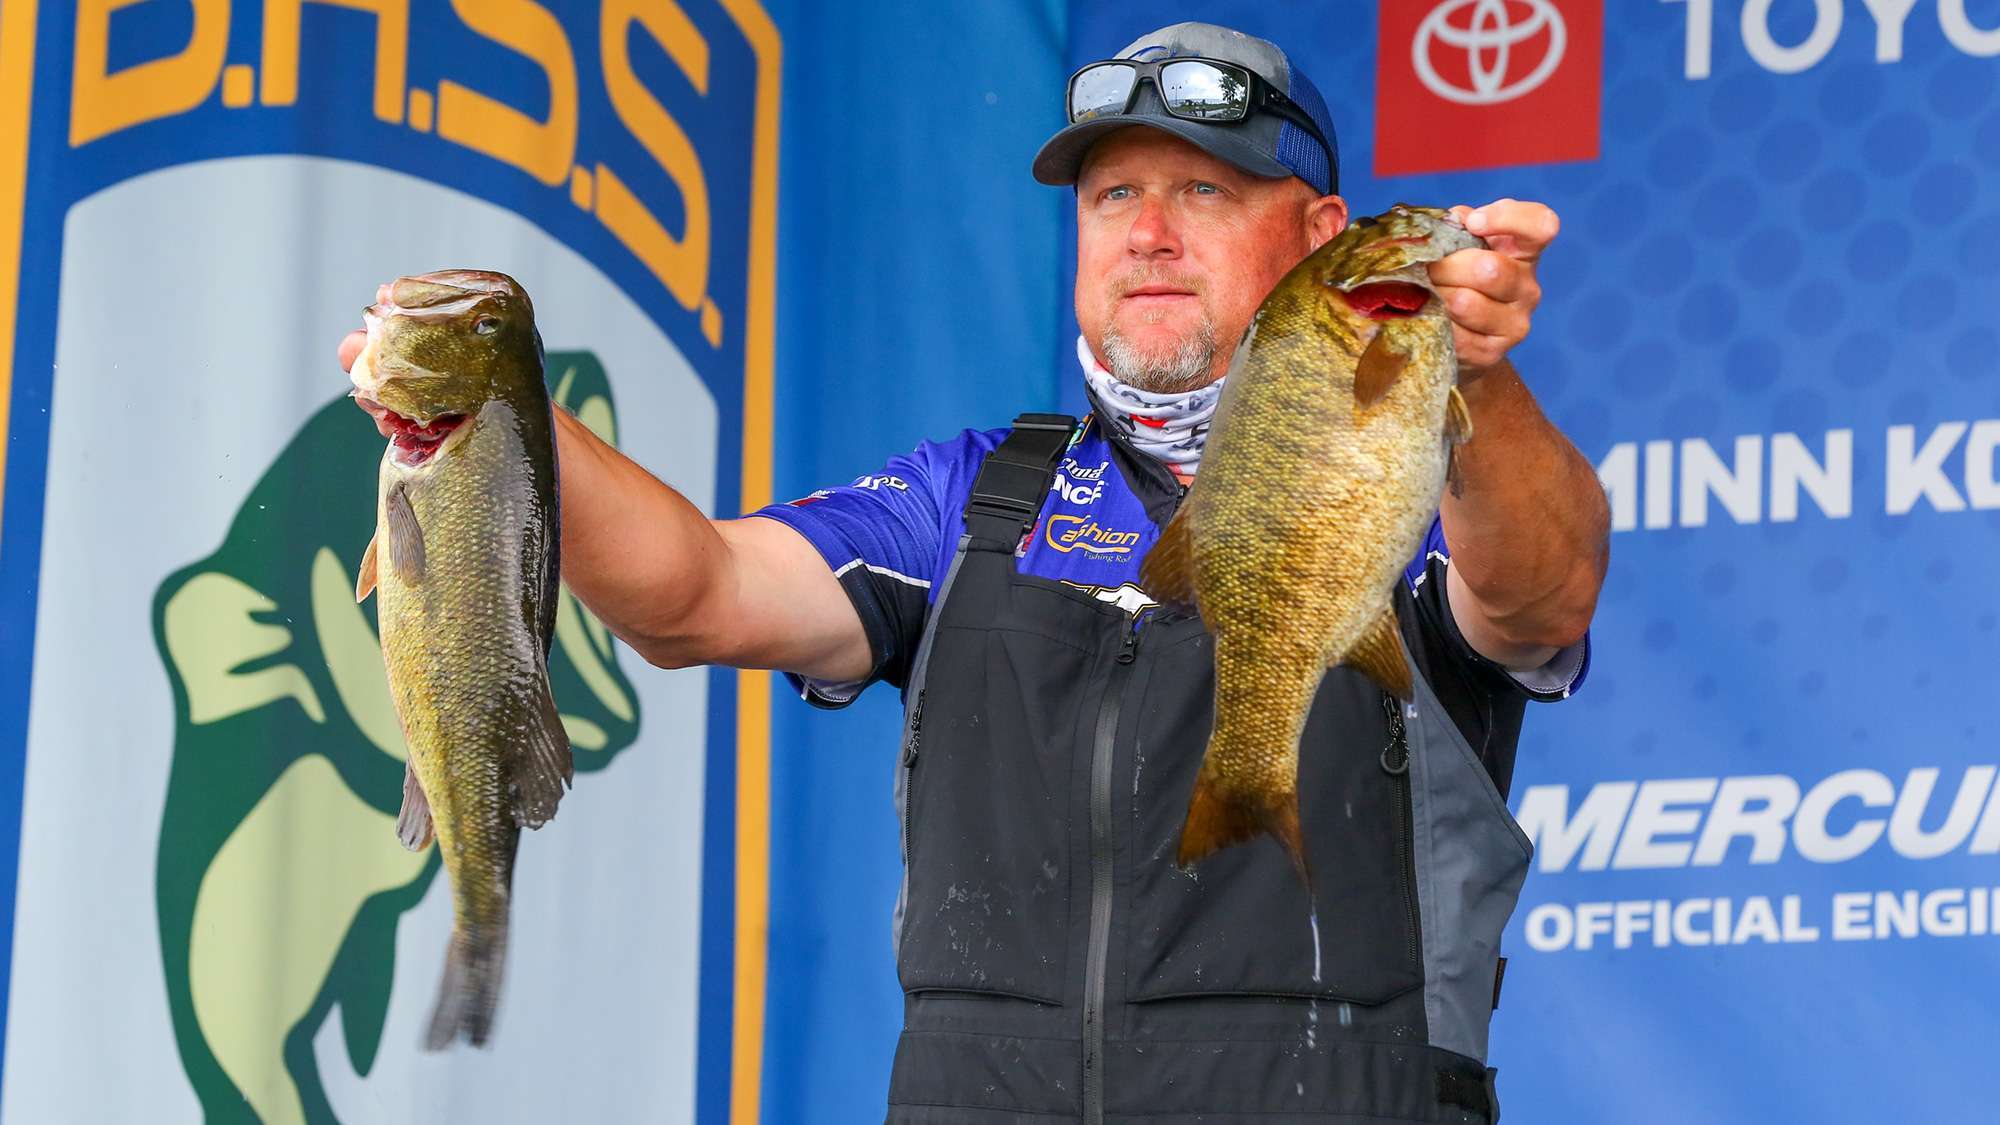 Champlain offers opportunities to target both largemouth and smallmouth, as evidenced here by Jamie Hartman last year when he brought in a mixed bag to lead with 22-1 on Day 1. âMy game plan every time Iâve been there has been to catch 15, 16, 17, 18 pounds of smallies and then go catch two big bucketheads to fill out a big bag,â Feider said. âIâll spend most of my practice looking for largemouth just because I think itâs harder to find the big ones.â